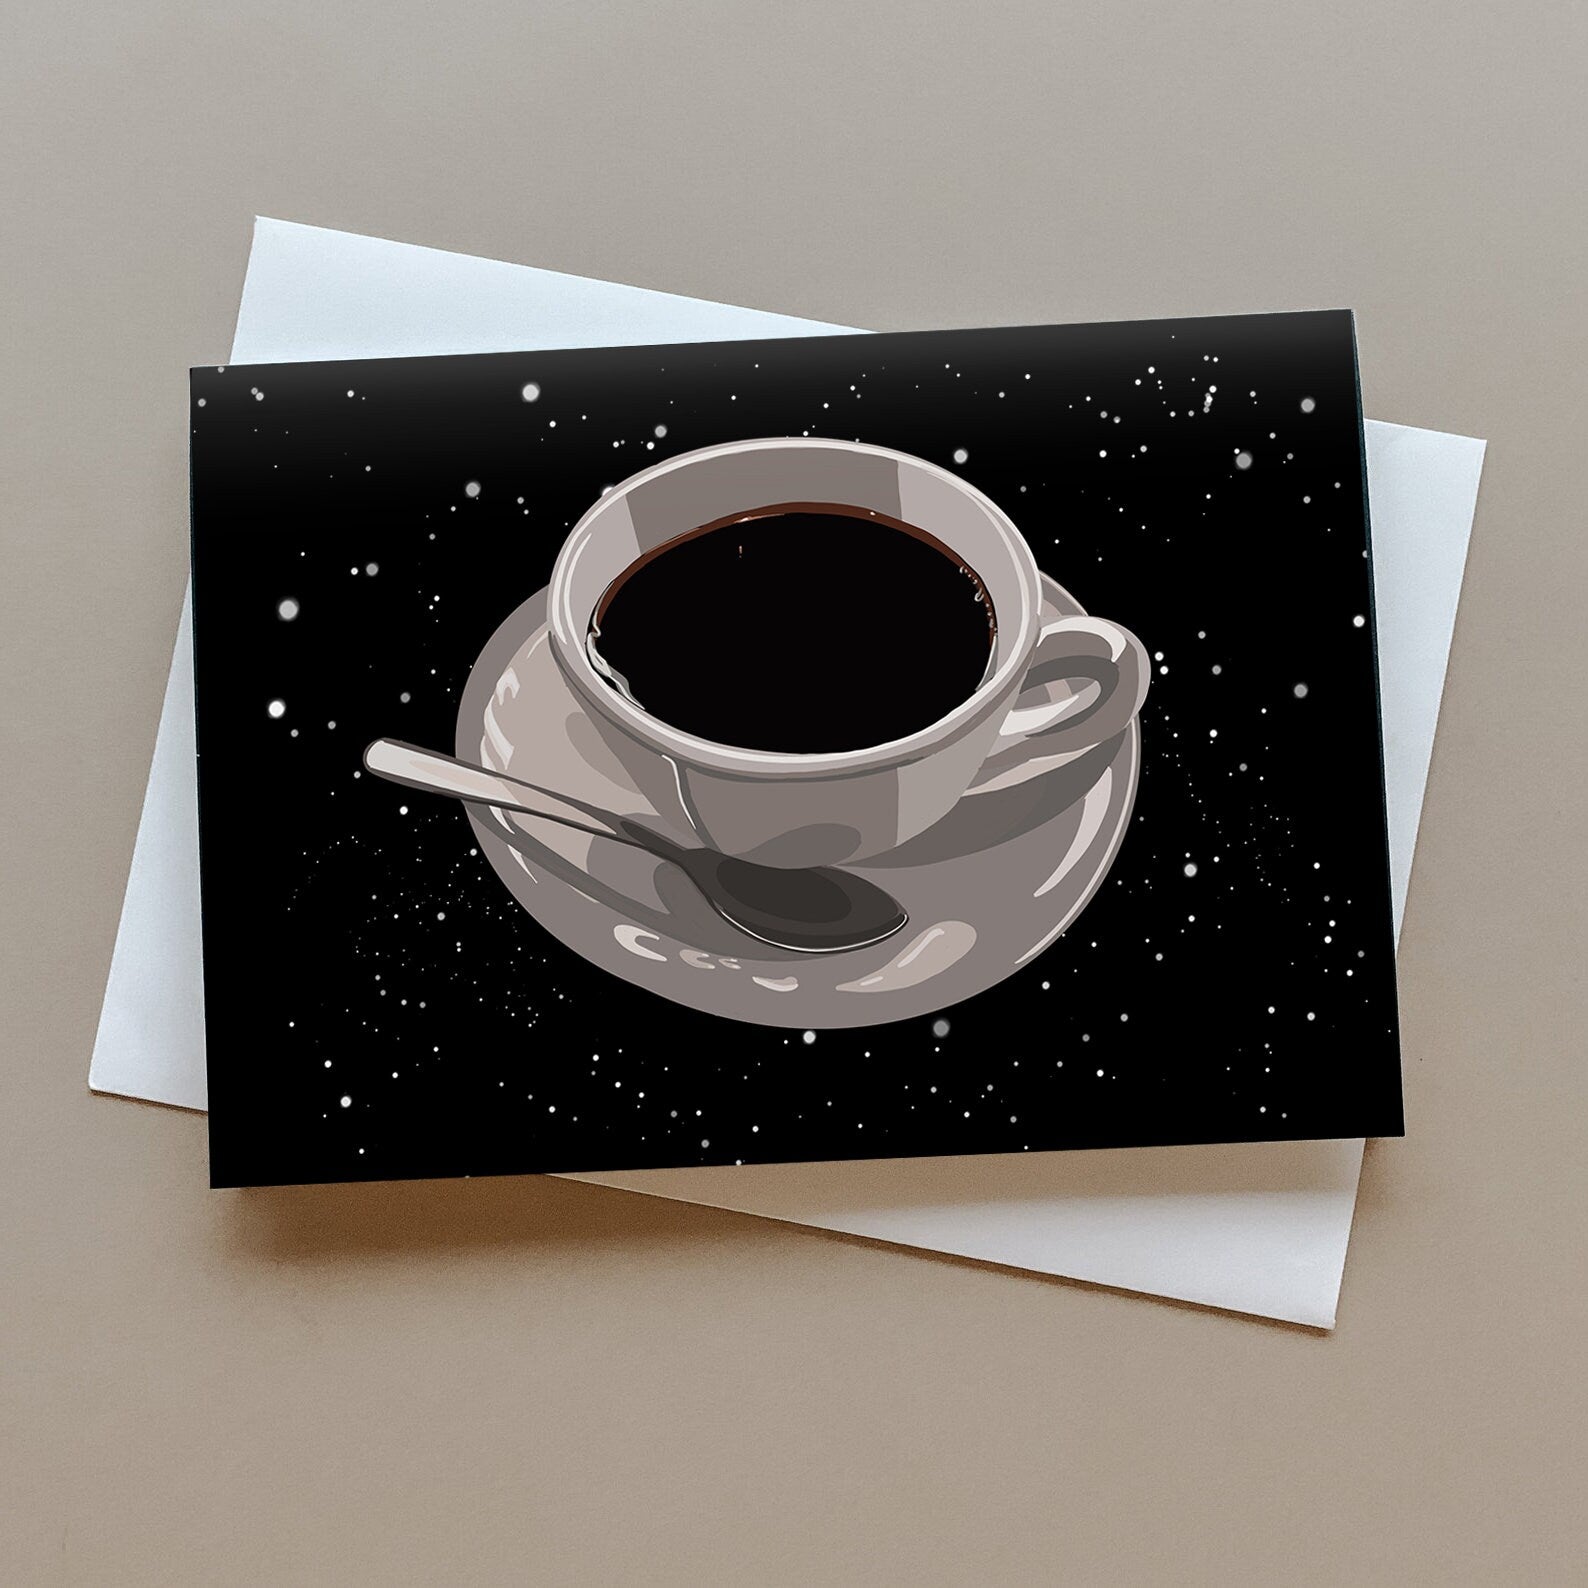 Coffee Flying Saucer in outer space greeting card, Card for coffee lovers, Funny card, UFO card, Outer Space, Caffeine card, quirky card